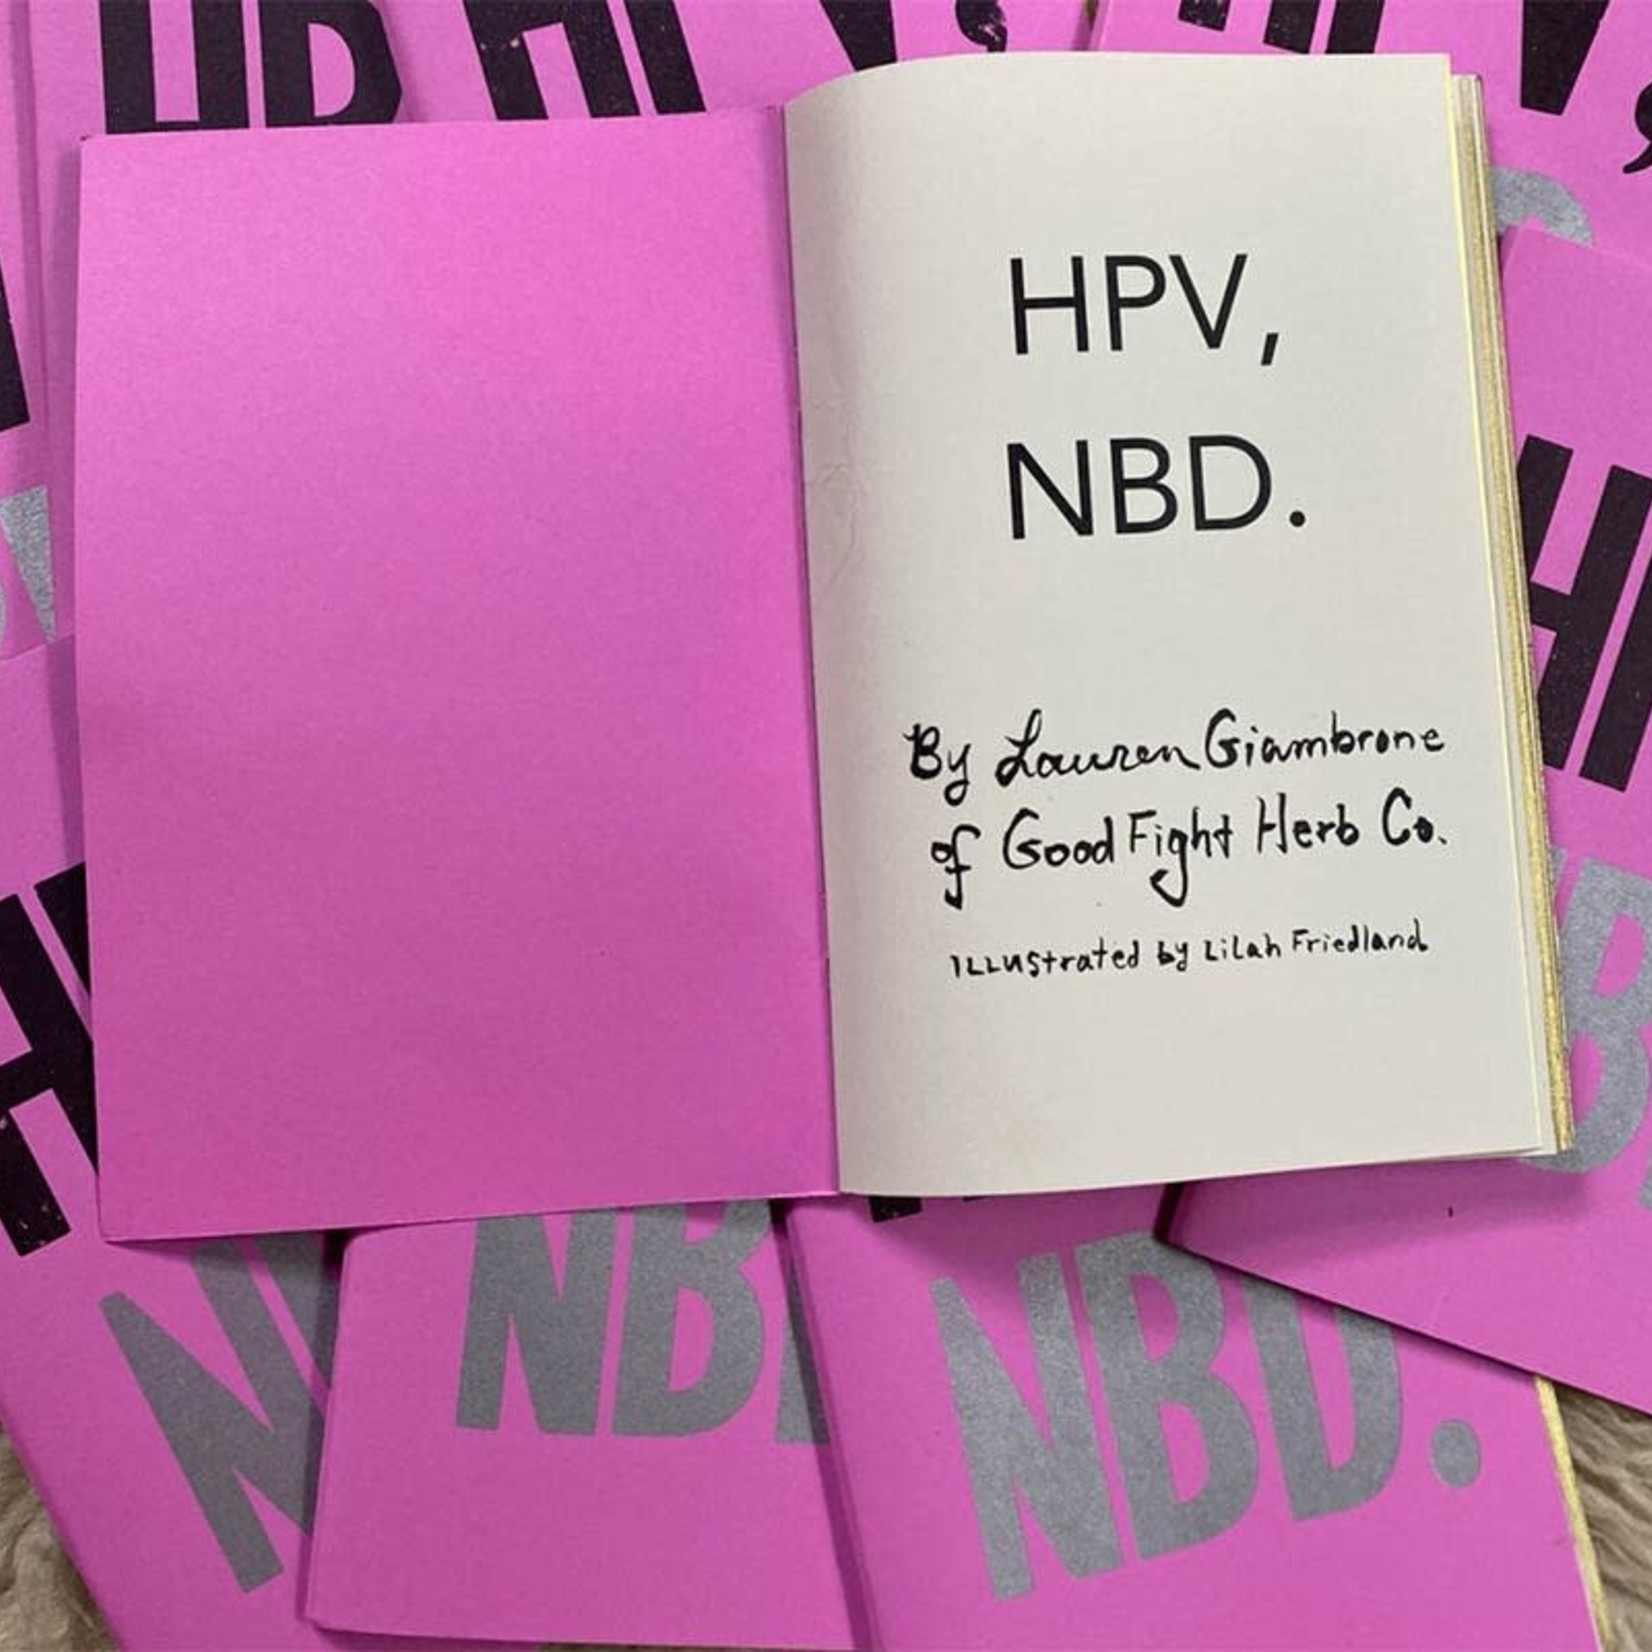 Good Fight Herb Co. HPV NBD Booklet by Good Fight Herb Co.